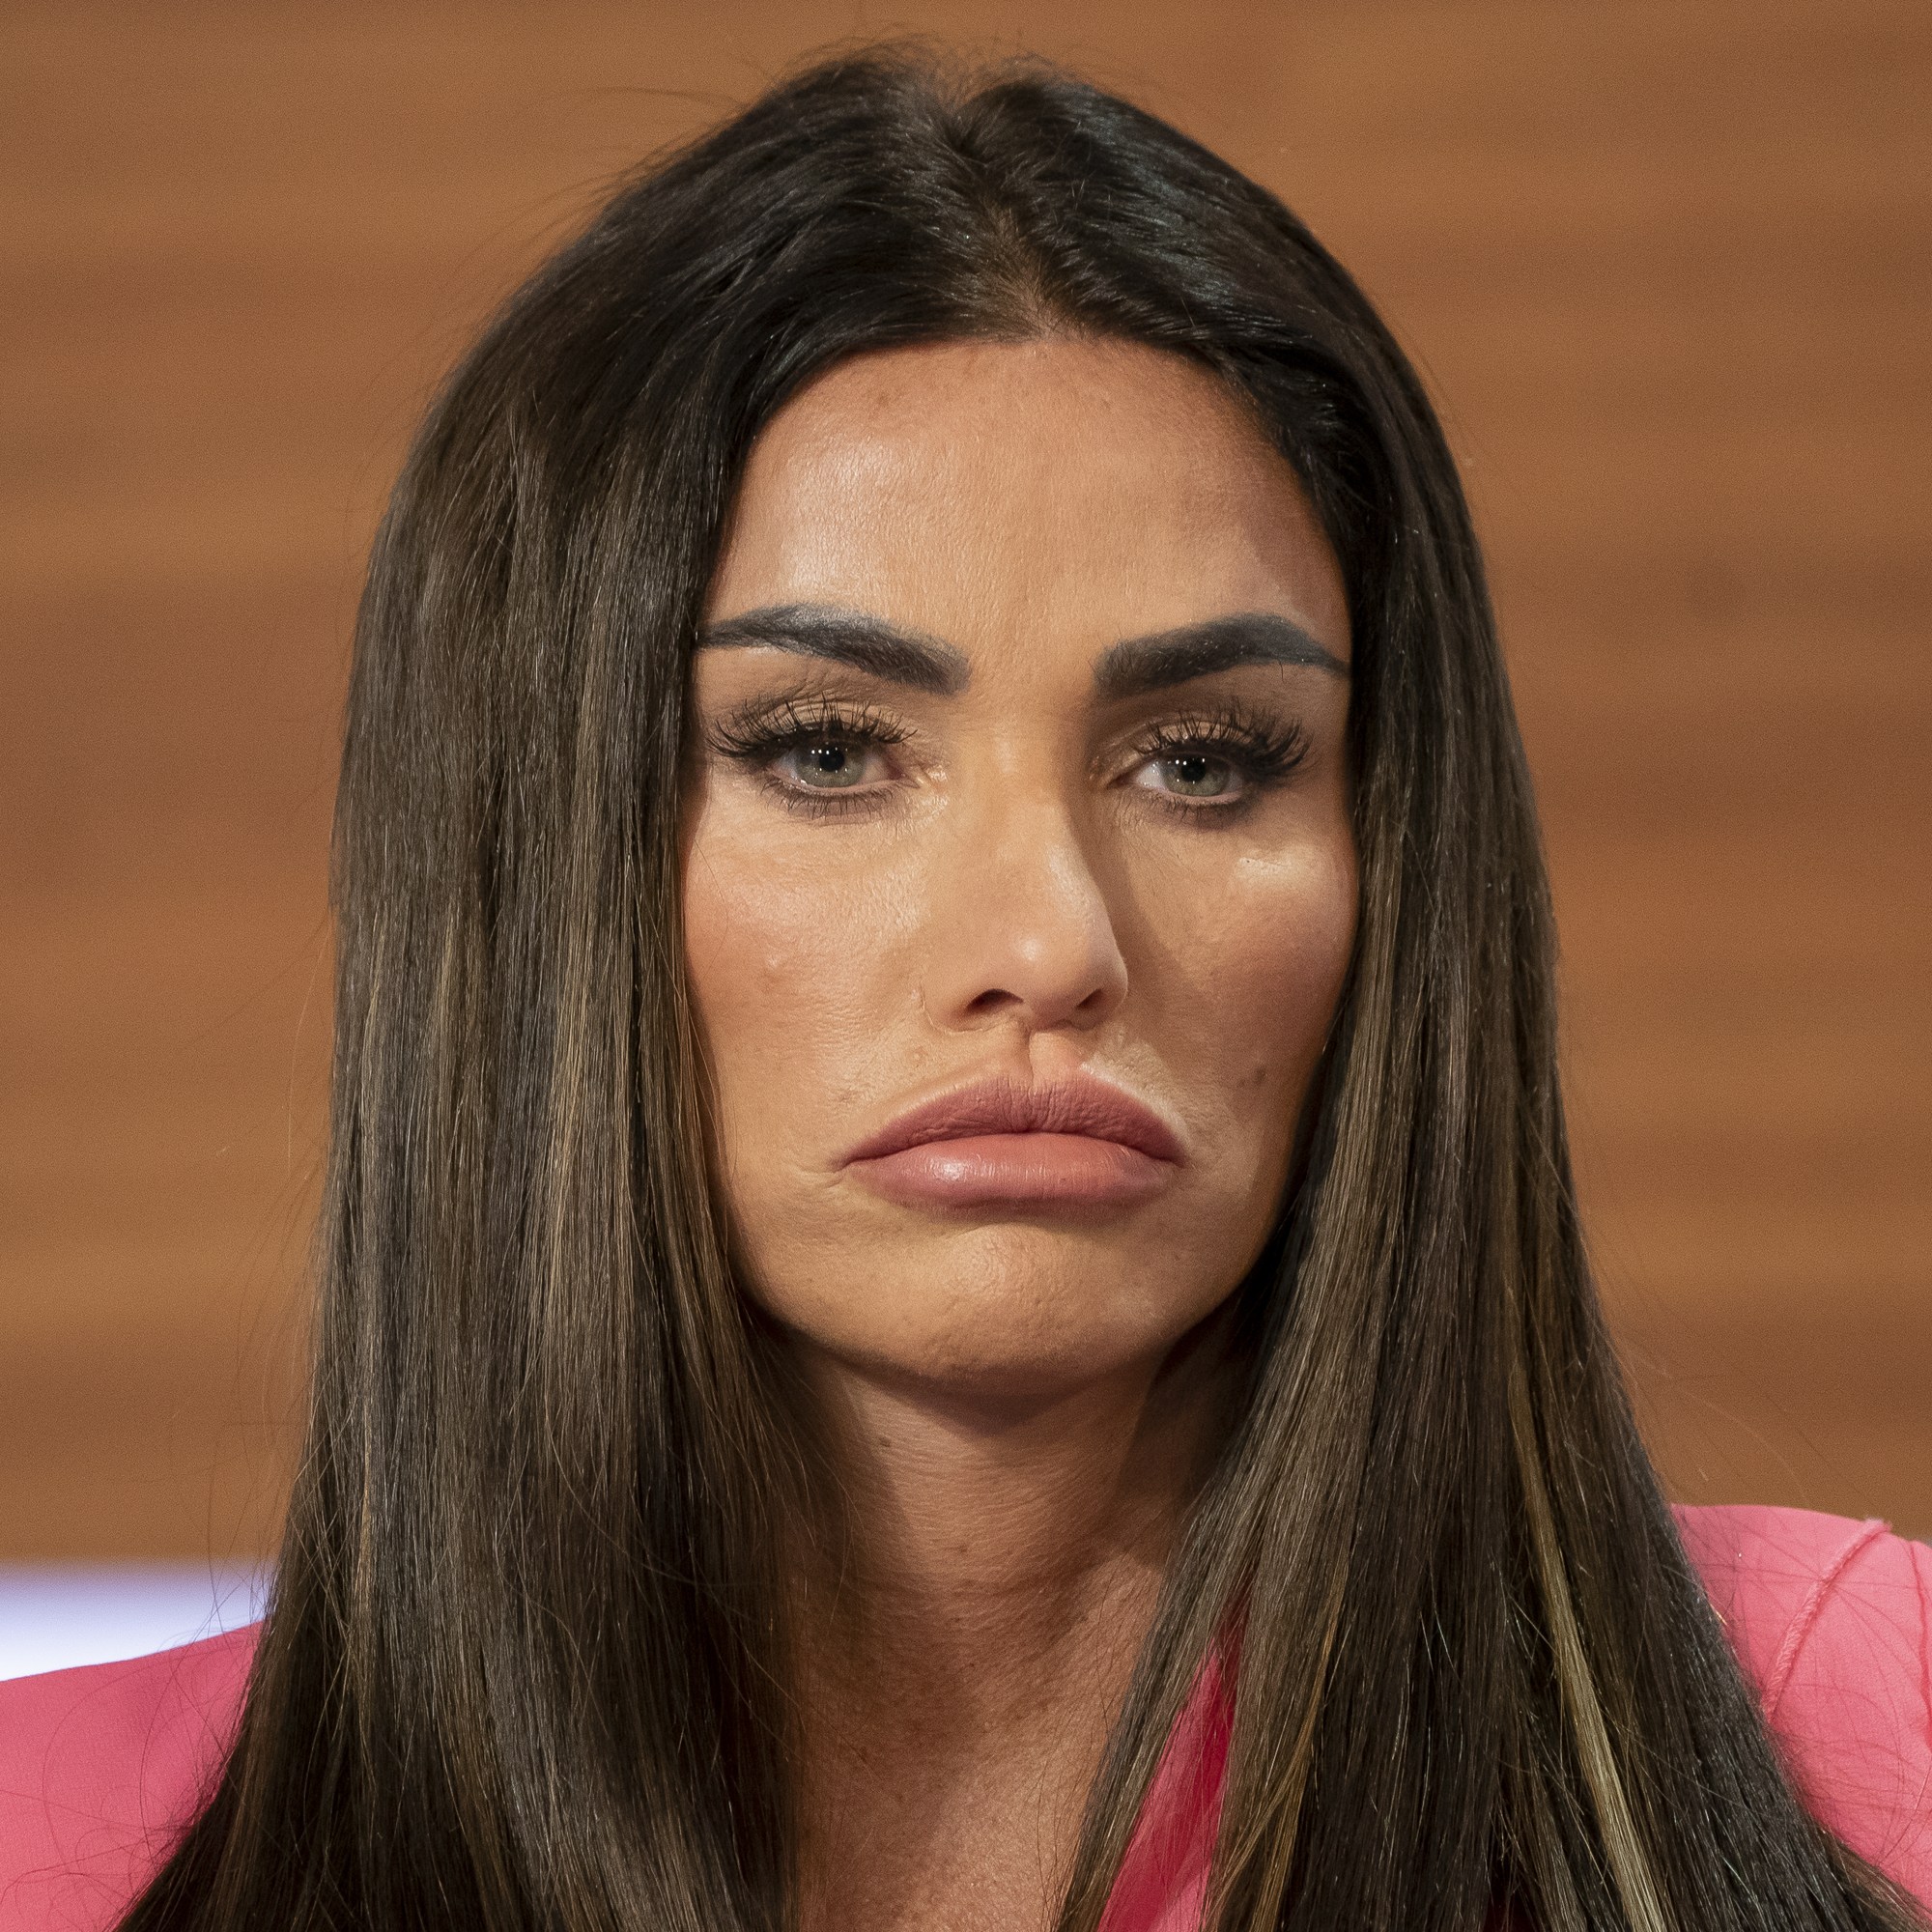 Katie Price has previously said she would go to jail to put an end to her court troubles